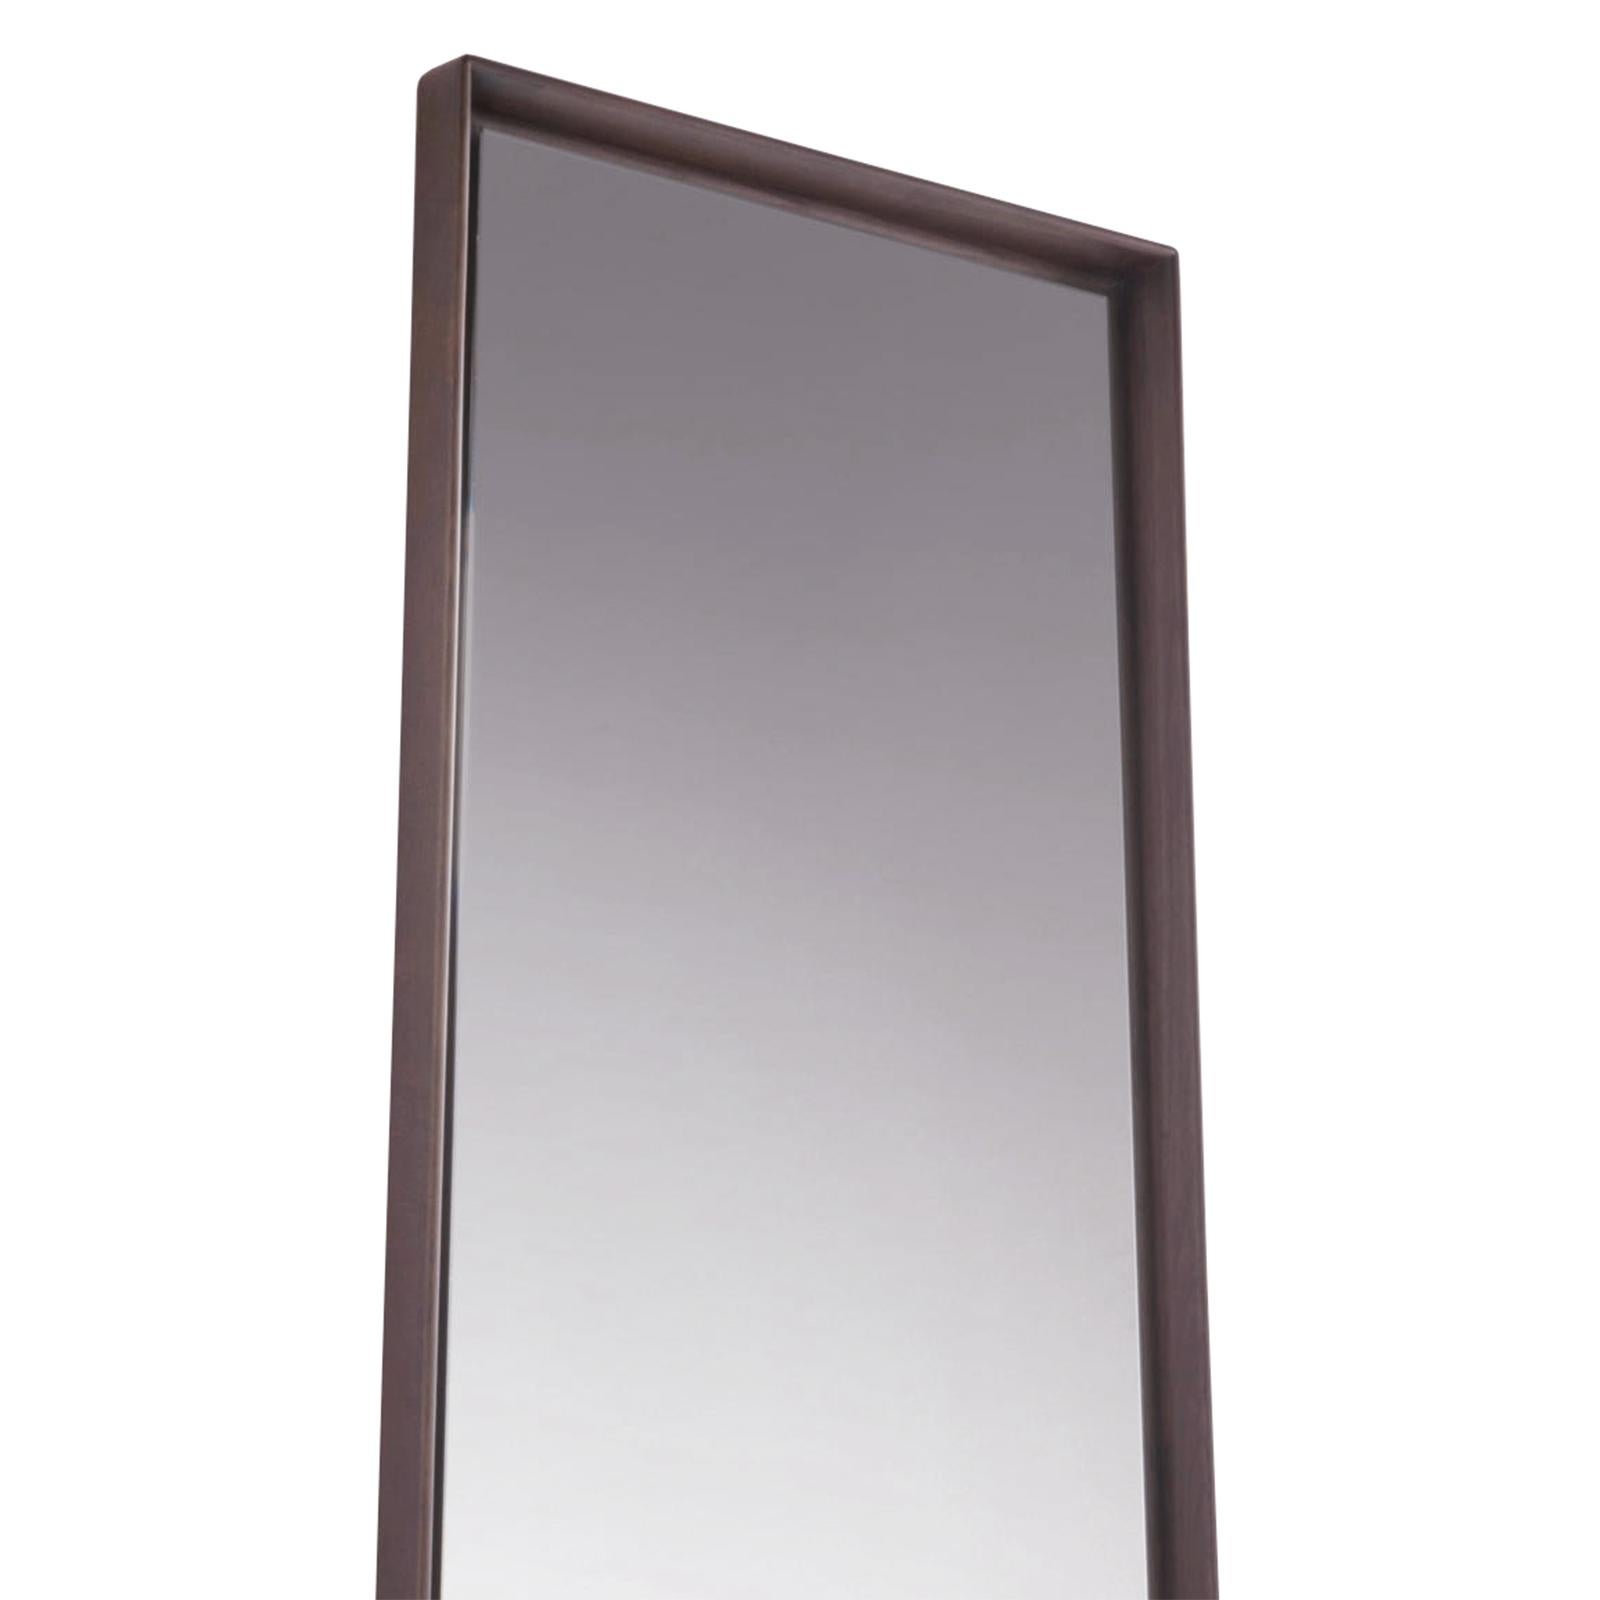 Mirror panel long ash with solid ash
wooden frame with mirror glass. Wall
mirror or floor mirror.
Also available in panel large ash mirror.